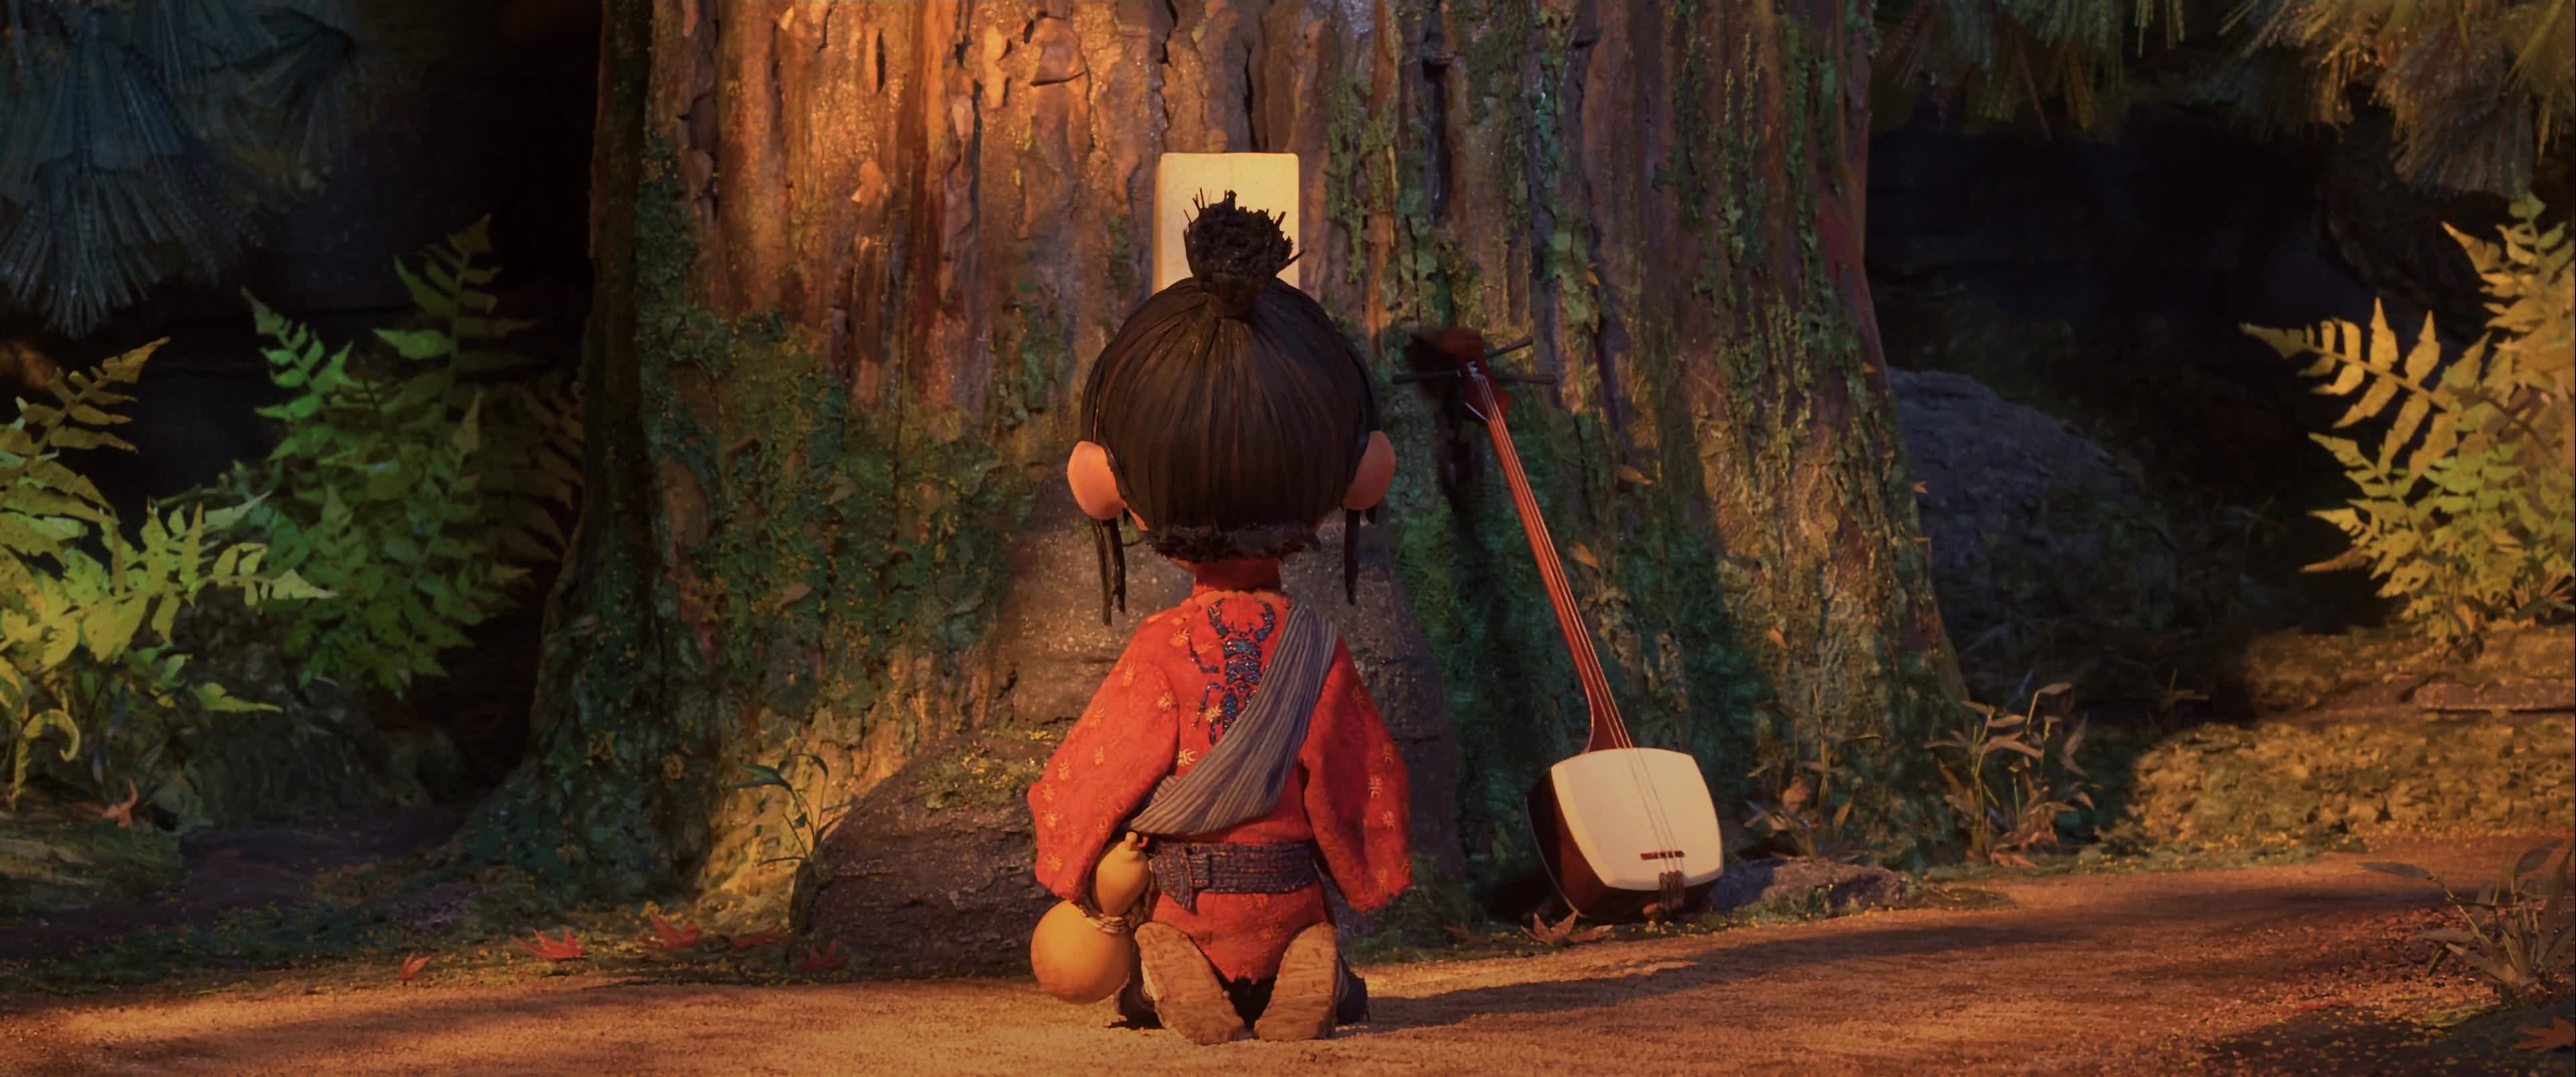 Kubo and the Two Strings 2016 2160p BluRay 3500MB DDP5 1 x264 GalaxyRG